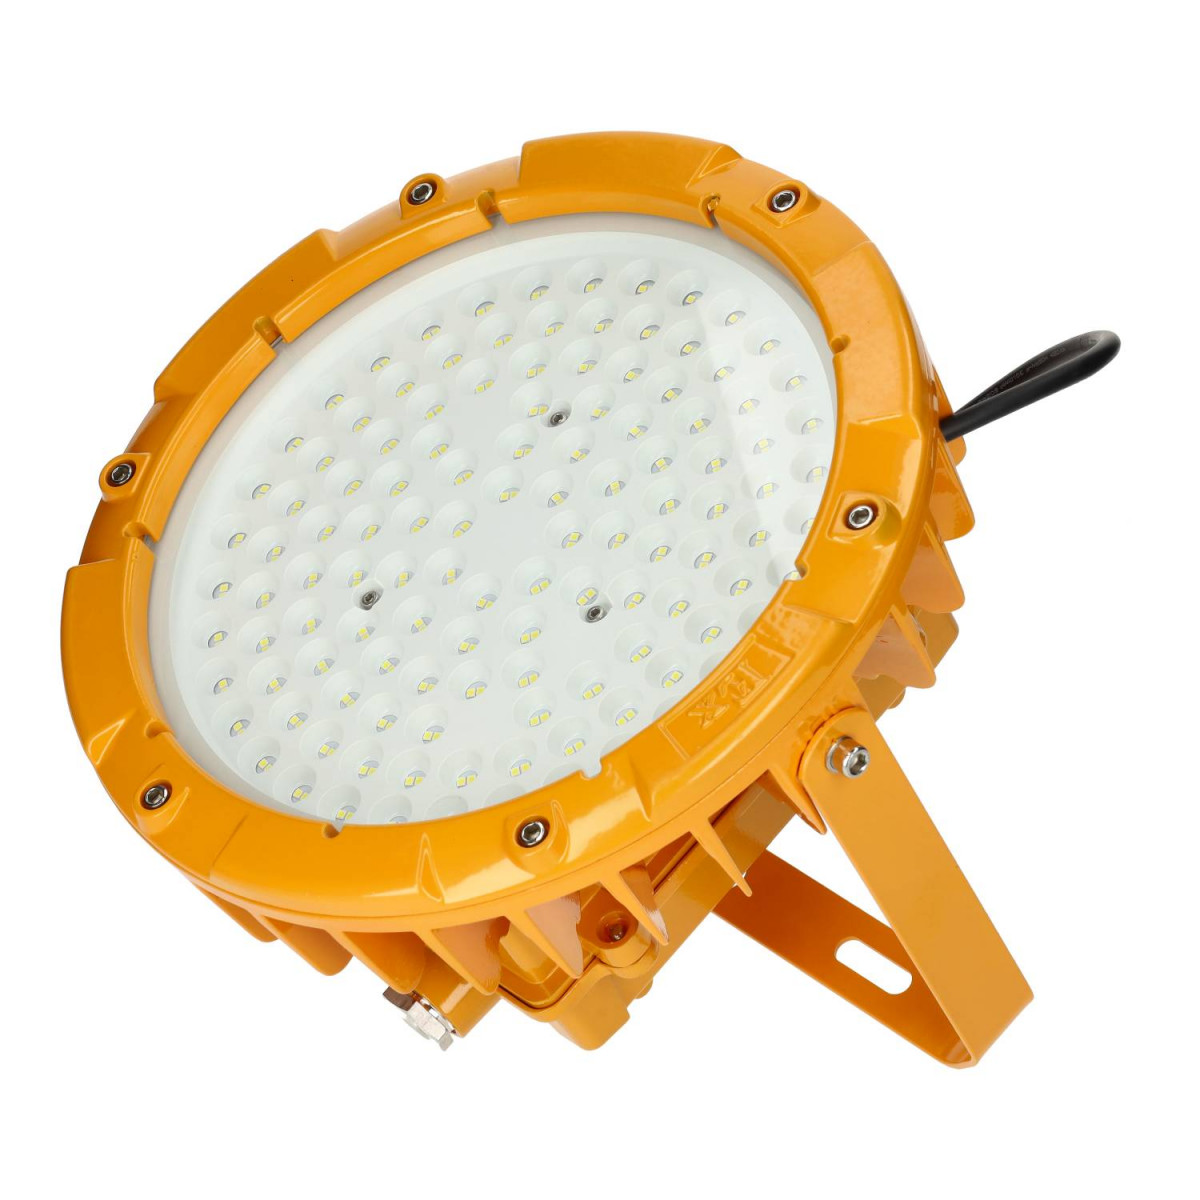 Cloche UFO ATEX LED 100W LUMILEDS - Mean Well